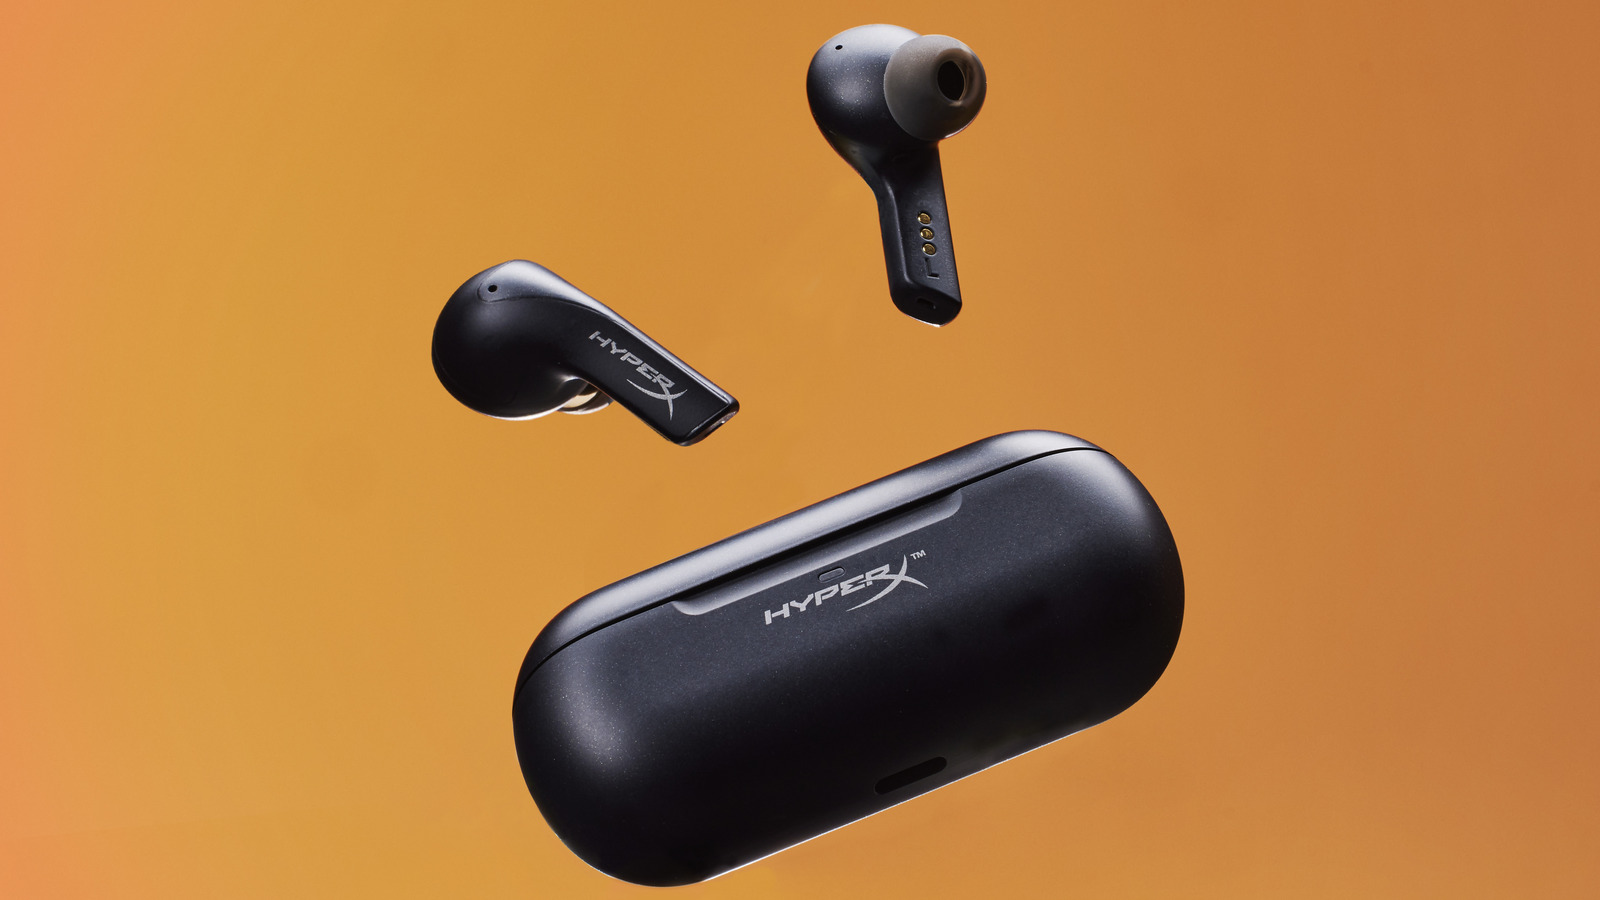 HyperX With True Cloud Wireless Headset Delivers Its First MIX Buds